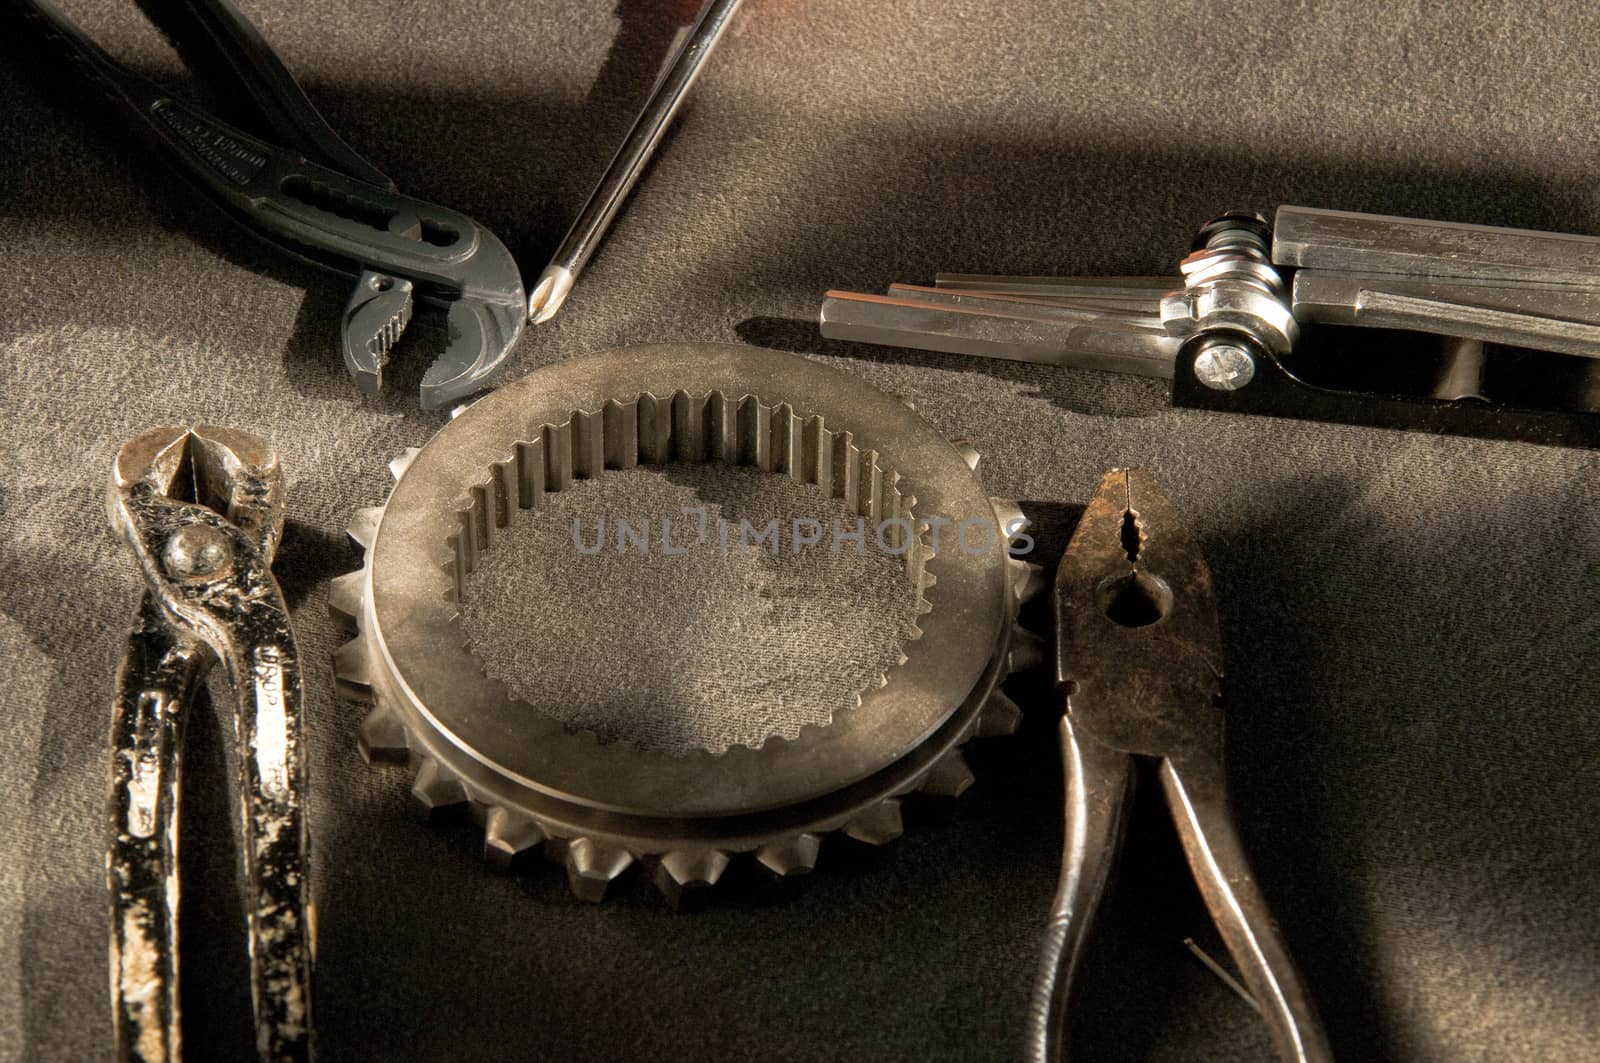 instruments, tools and clutch to perform work on mechanical parts